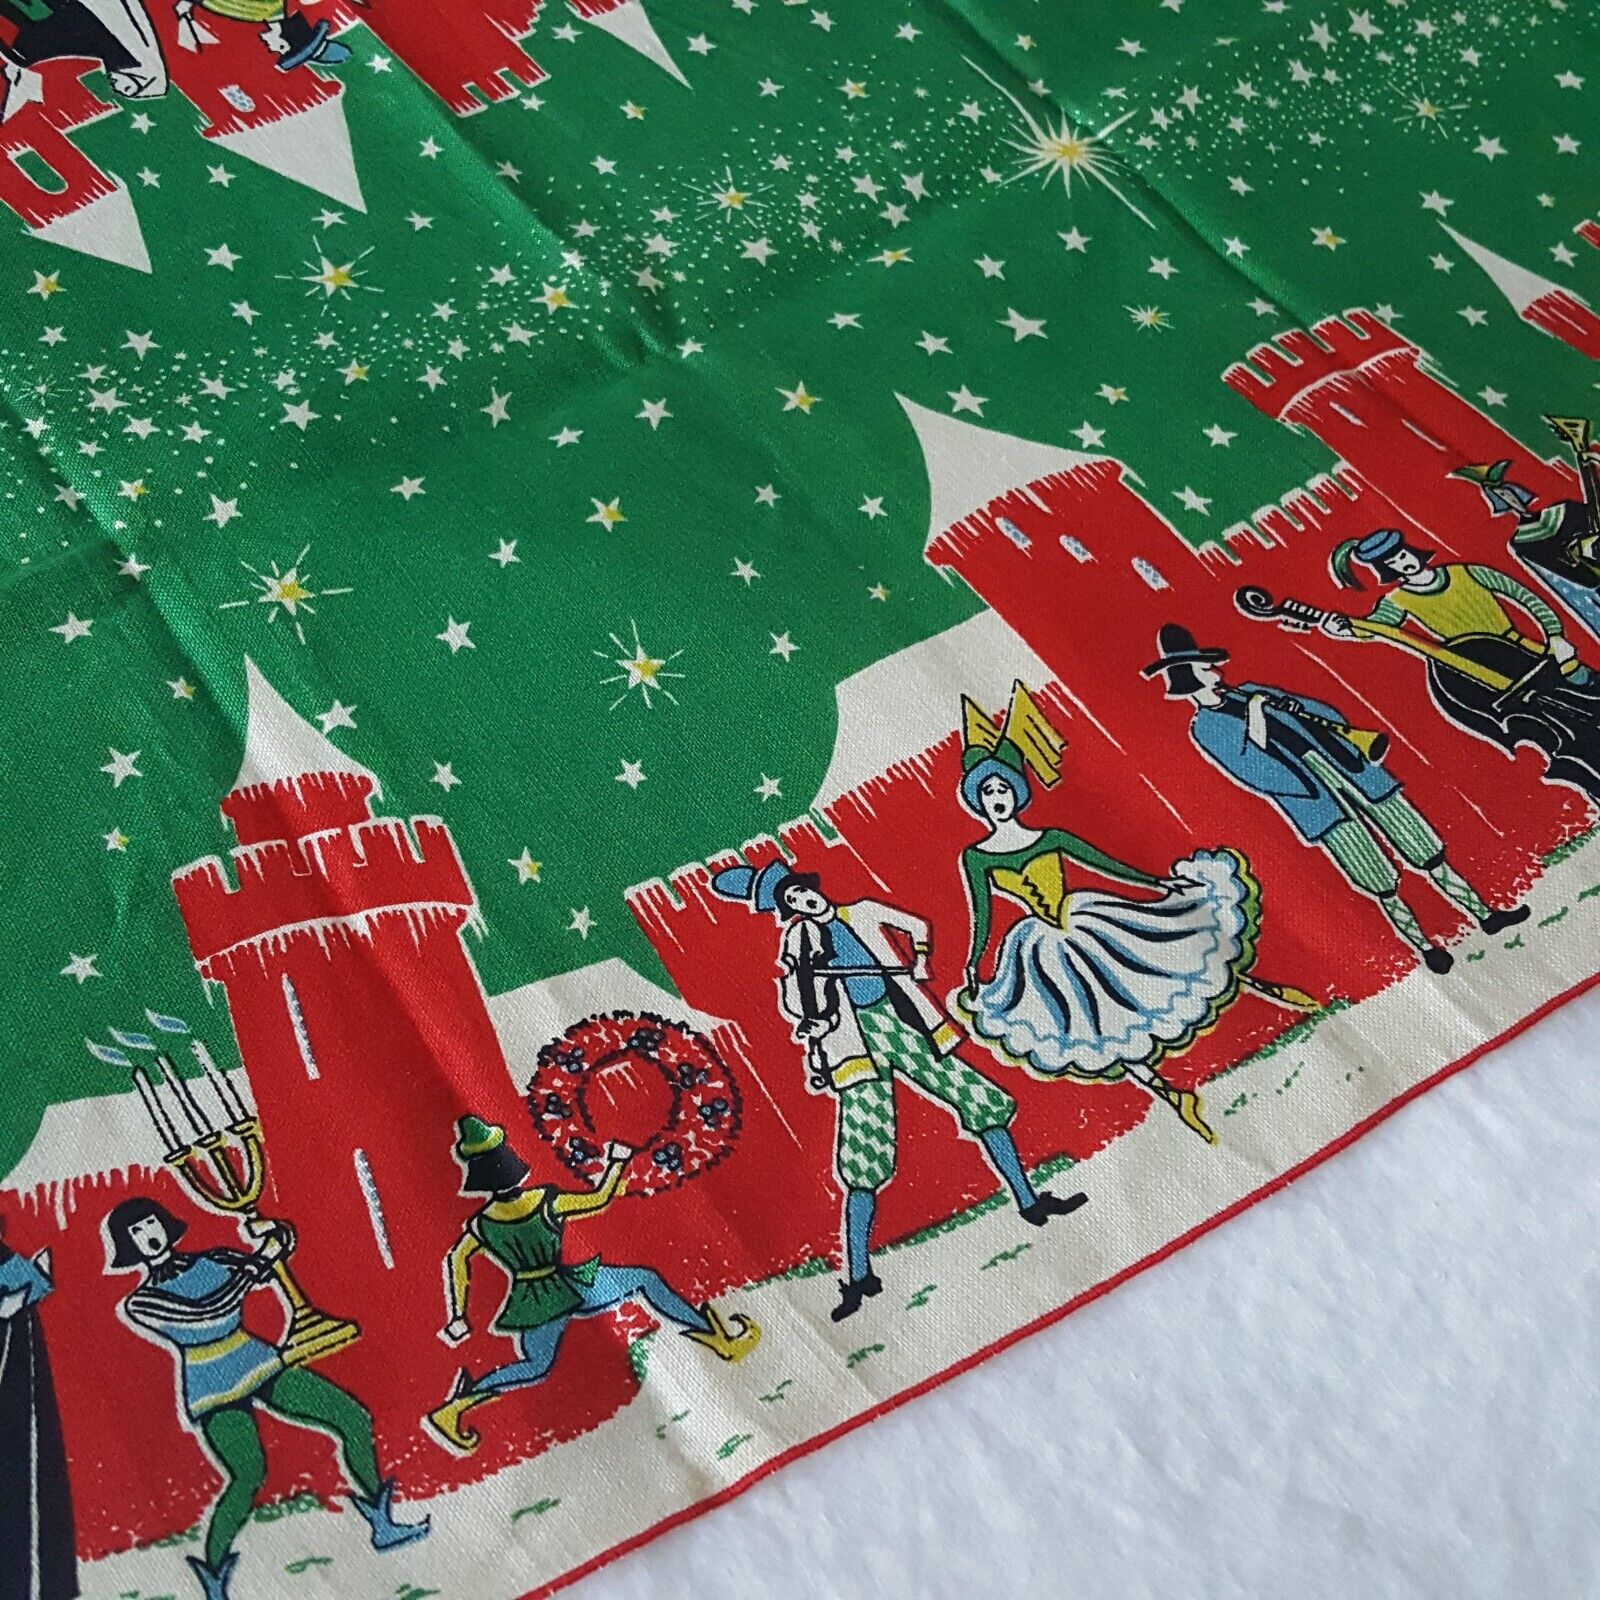 Vintage 18th-19th cent. themed French Linen Christmas Runner Tablecloth NEW